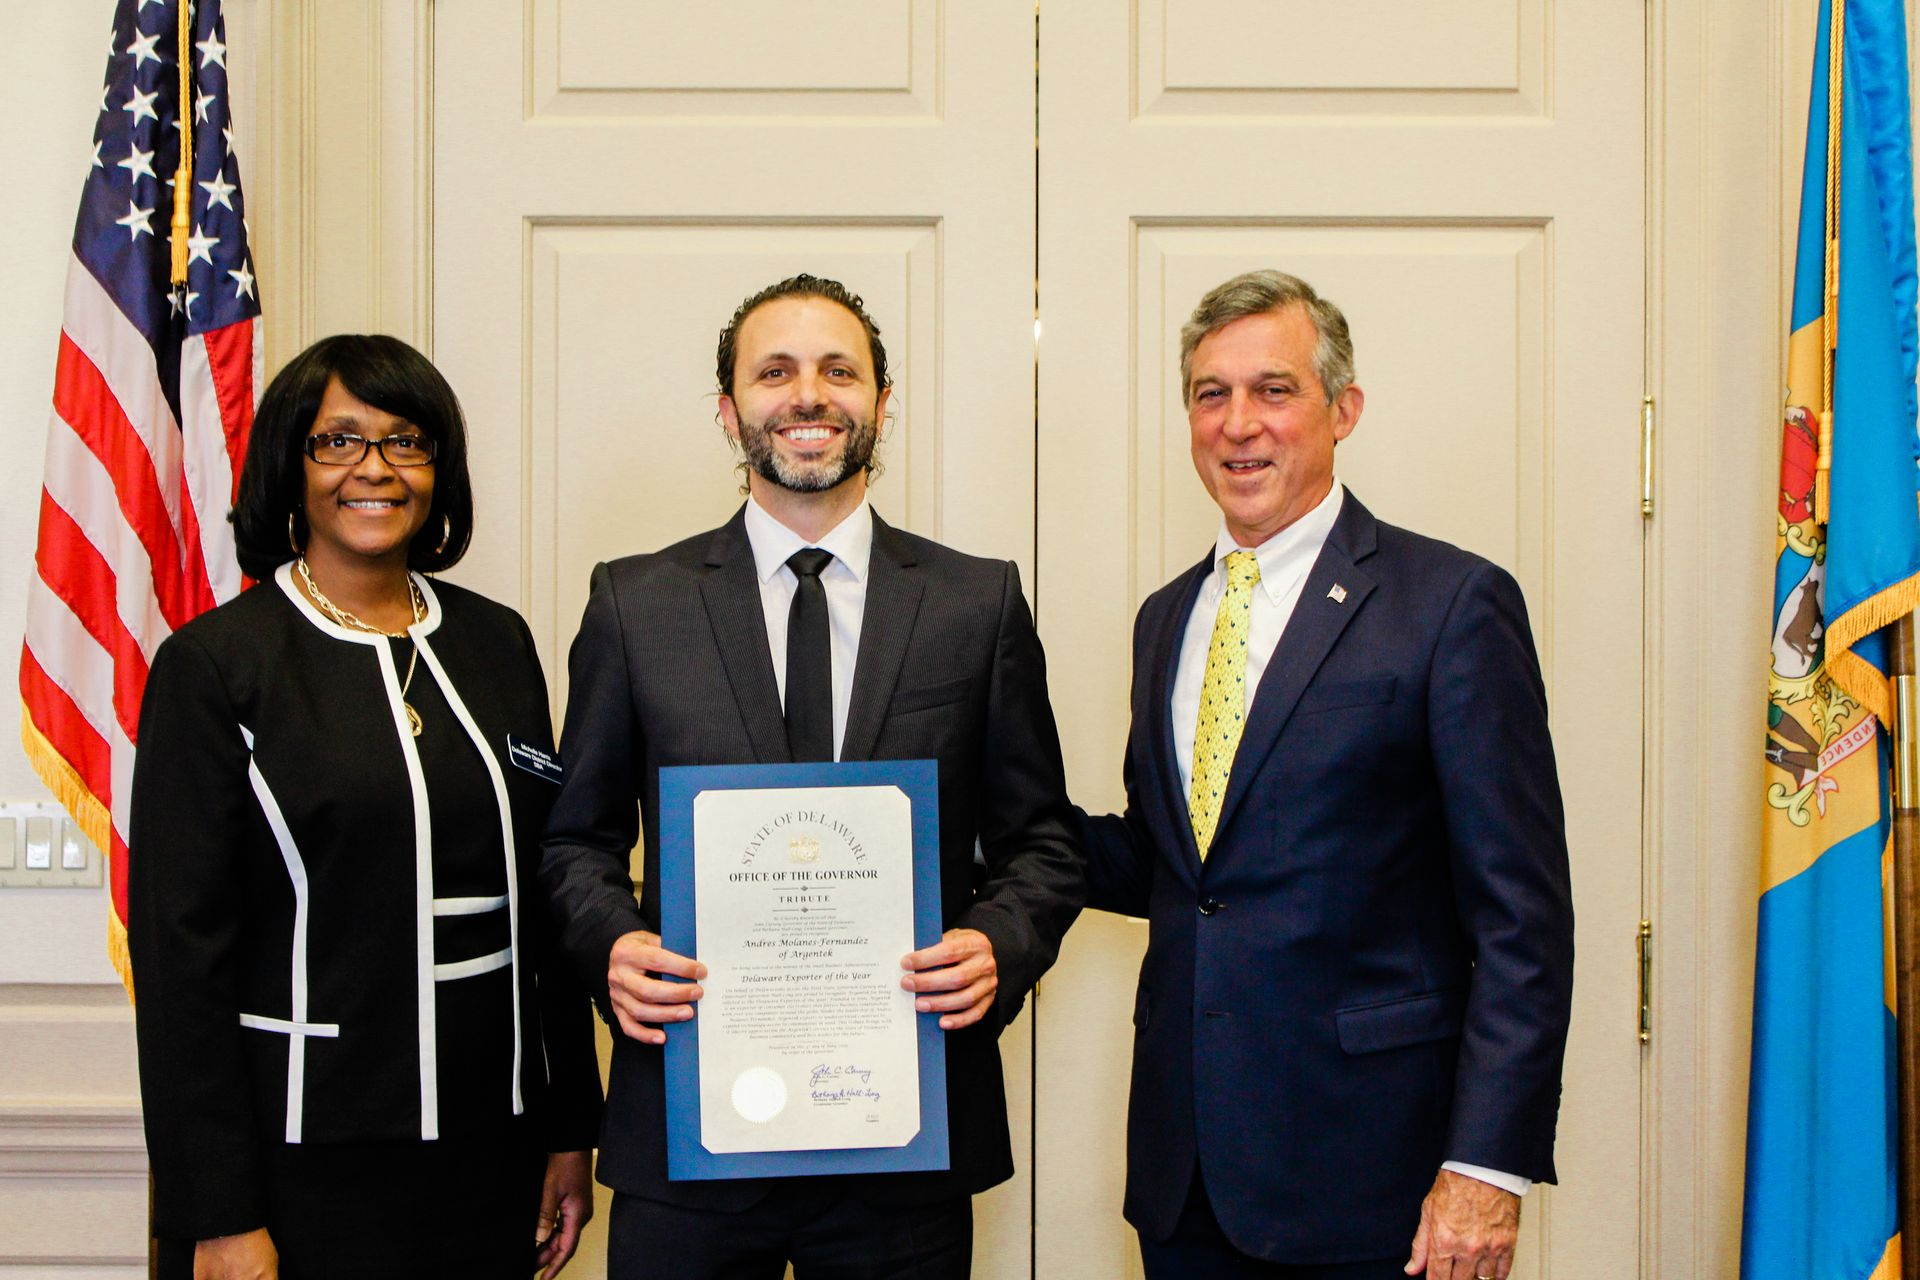 Argentek CEO Andres Molanes with Governor John Carney and SBA Delaware Region Director Michelle Harris